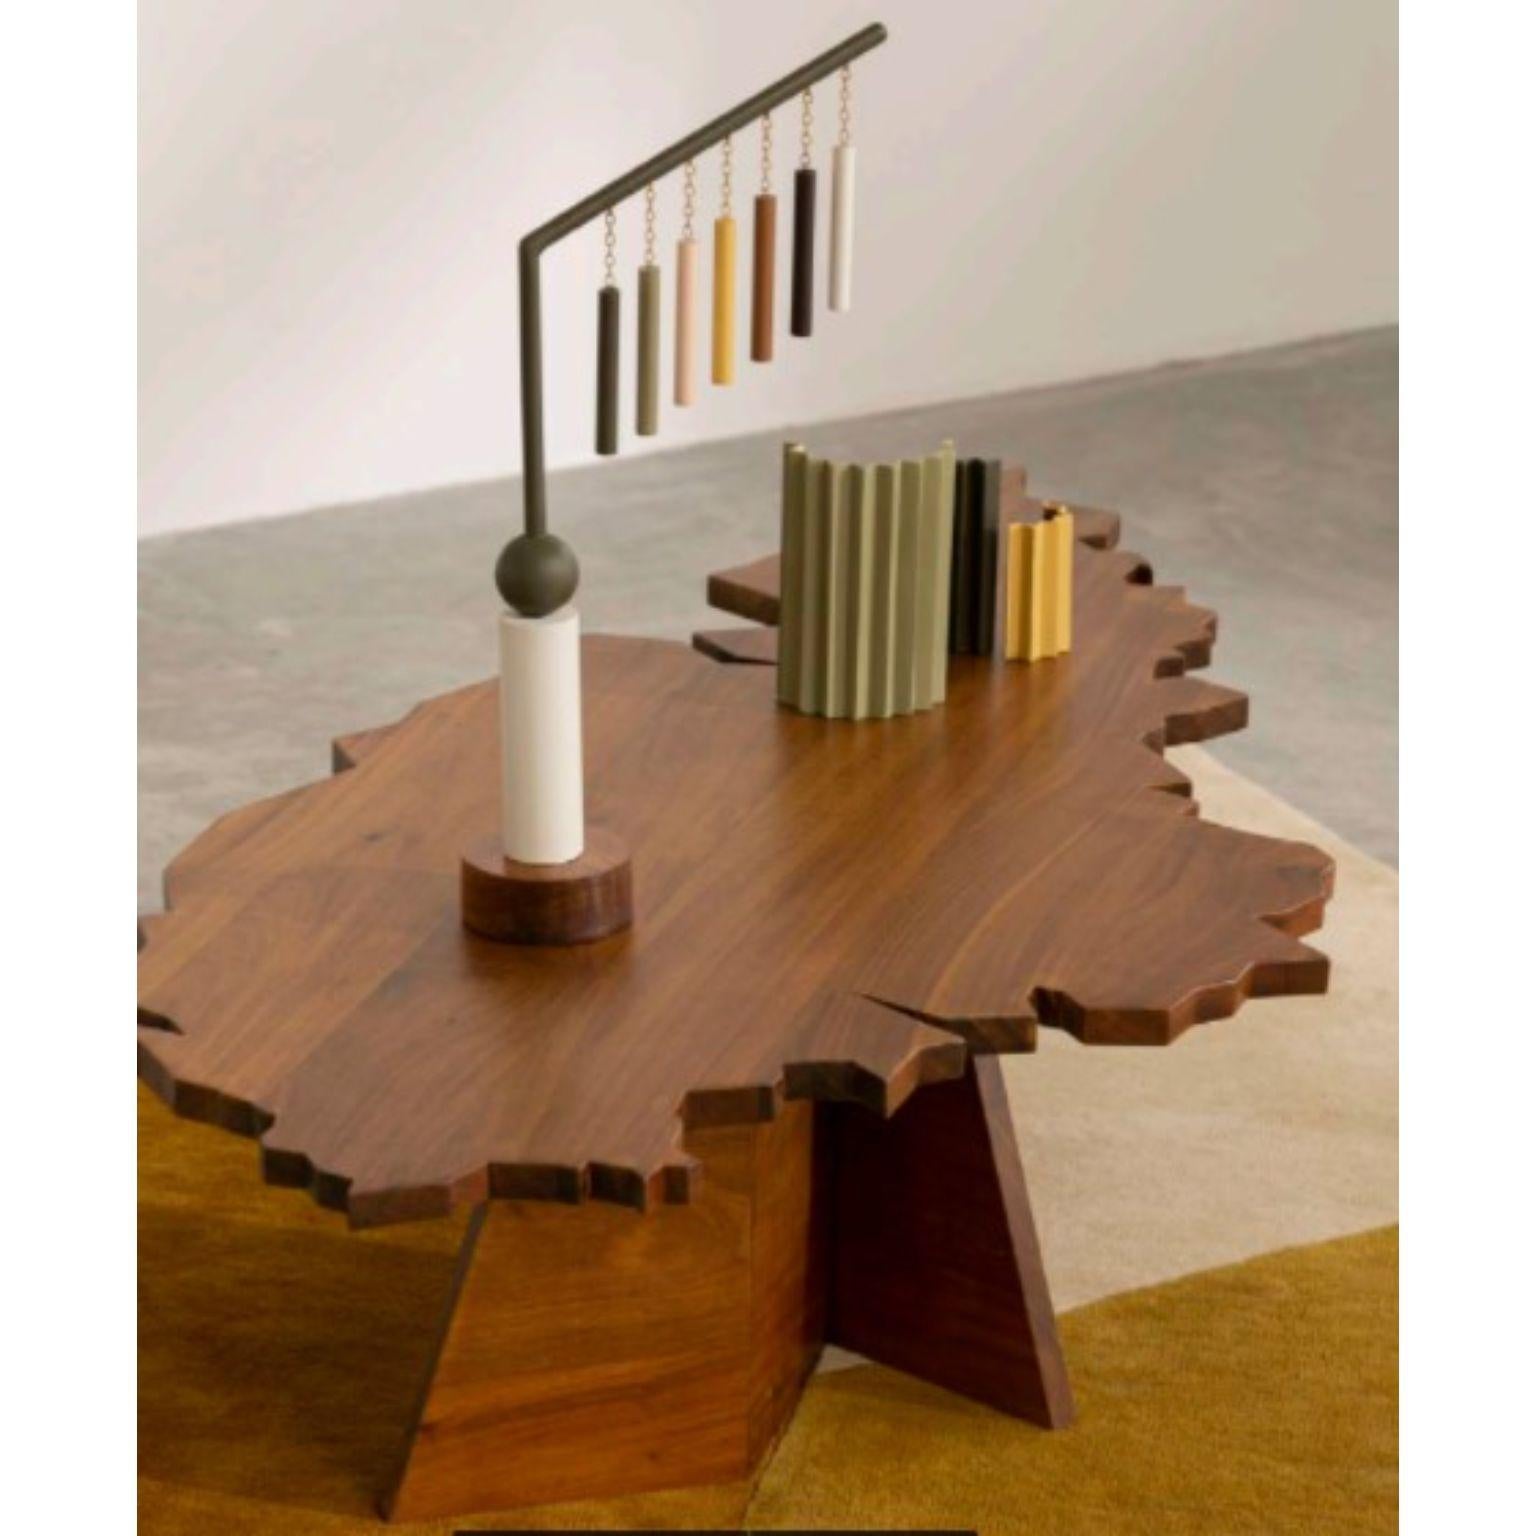 Set of Objects and Leaf Table by Sofia Alvarado
Objects: Balance in Depression, Licuala Grandis
Dimensions: D 150 x W 70 x H 40 cm
Materials: Zapatero Wood

FI is an ornamental artist who embodies the creative revelation of the sensitivity of the